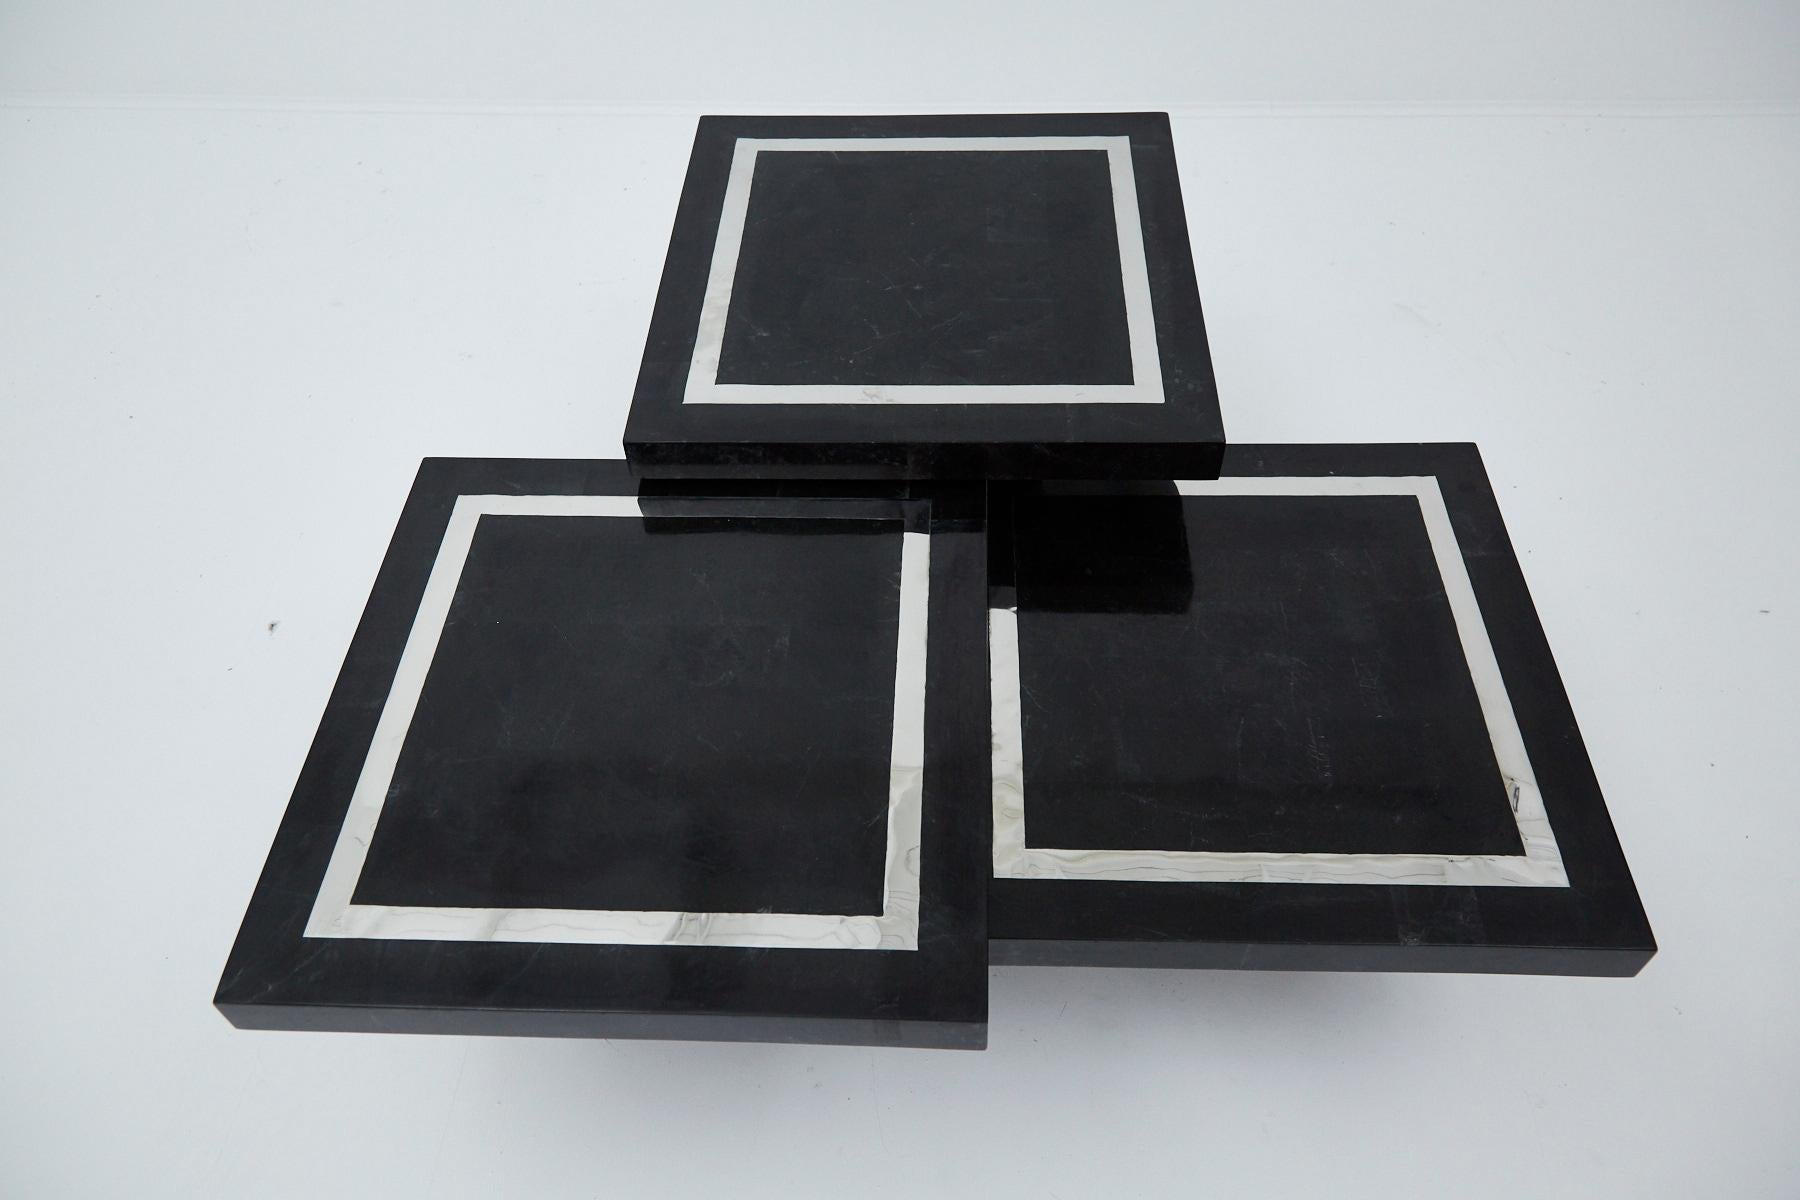 Set of three square mushroom tables of varying heights that can be configured into one larger coffee table. Tables are each comprised of fiberglass with inlaid black tessellated stone throughout, accenting with stainless steel banding to